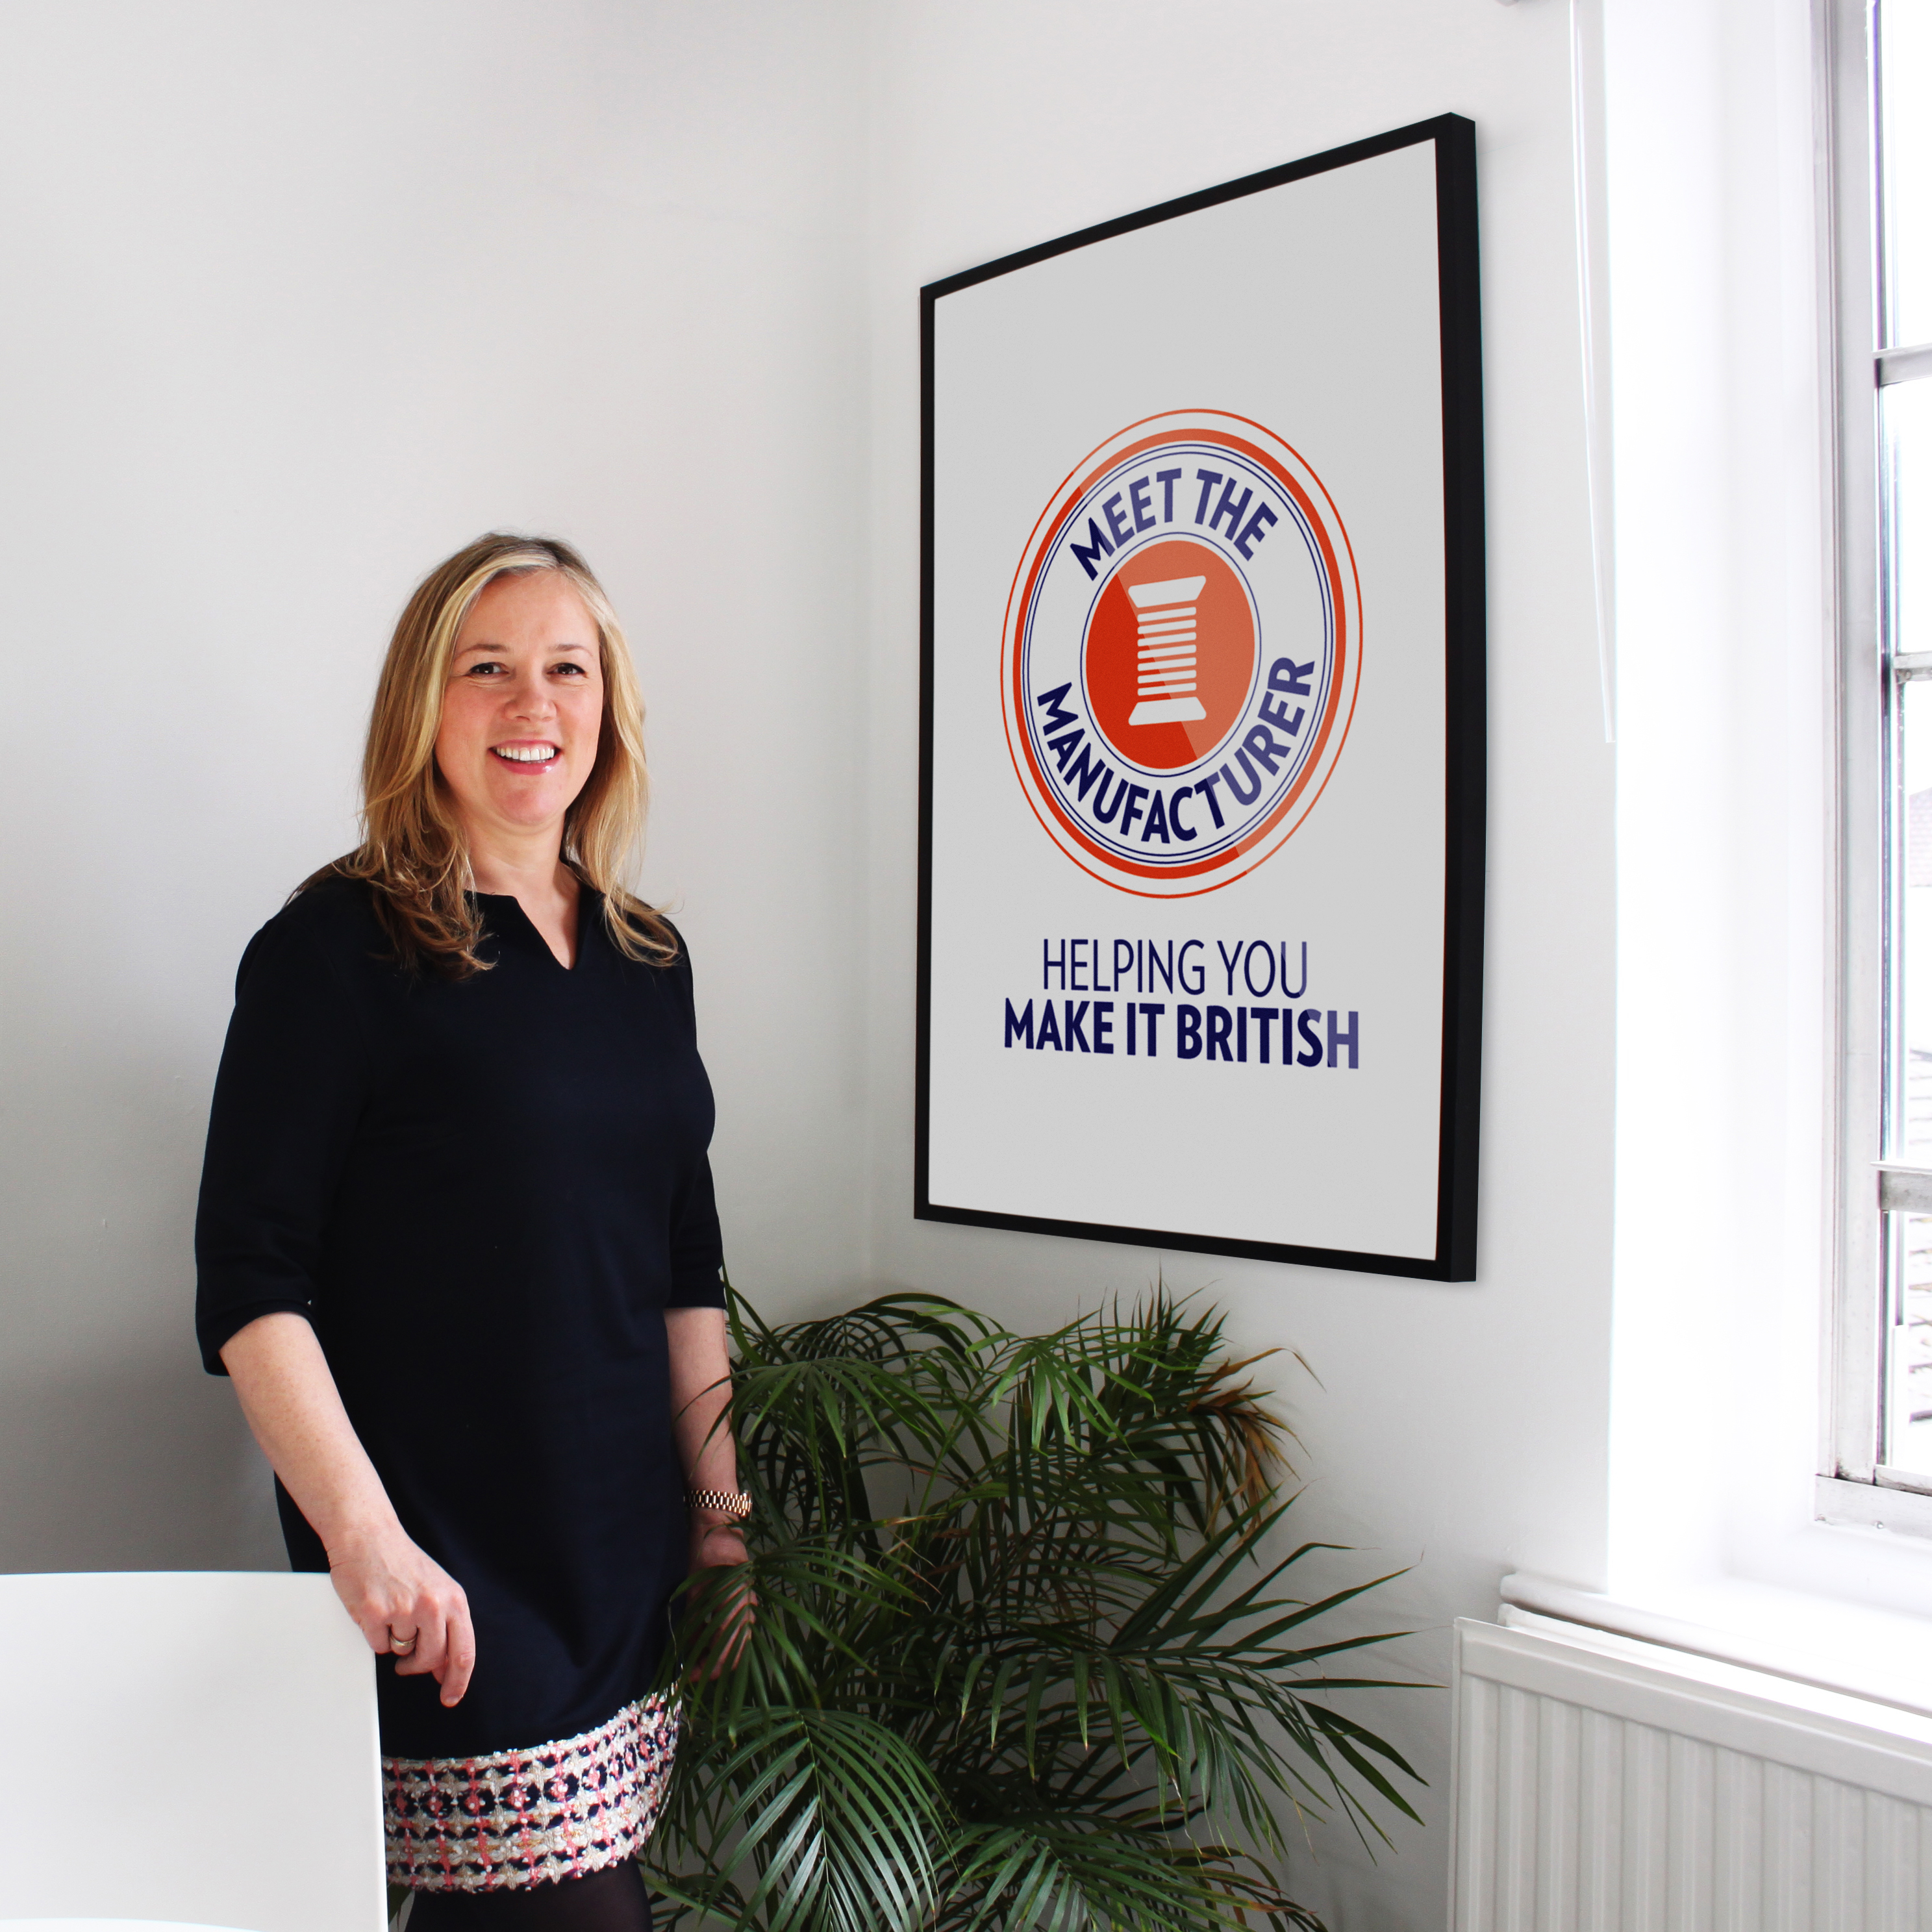 Kate Hills, Founder and CEO of Make it British